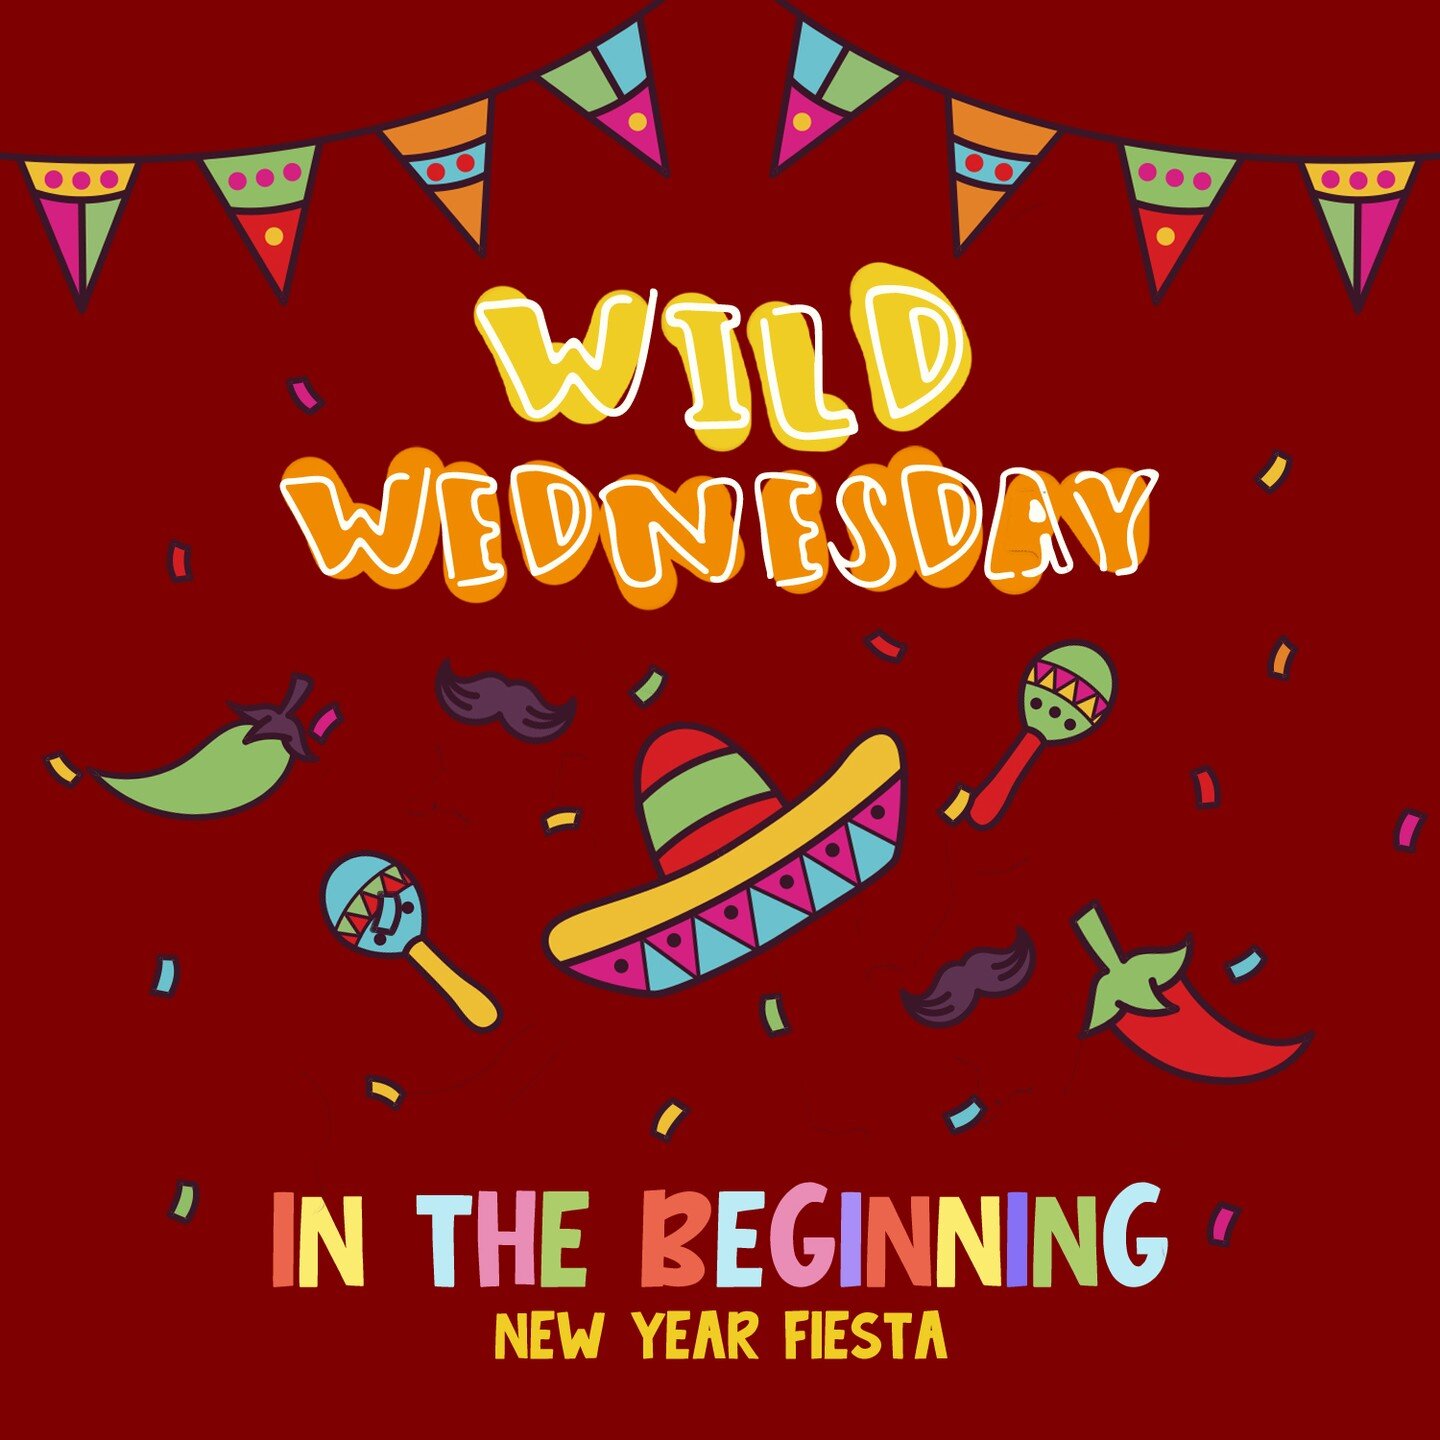 Tonight is Wild Wednesday! We hope your students can join us for this fun-filled night of worship, reading the Word, and dressing up in their best fiesta attire!